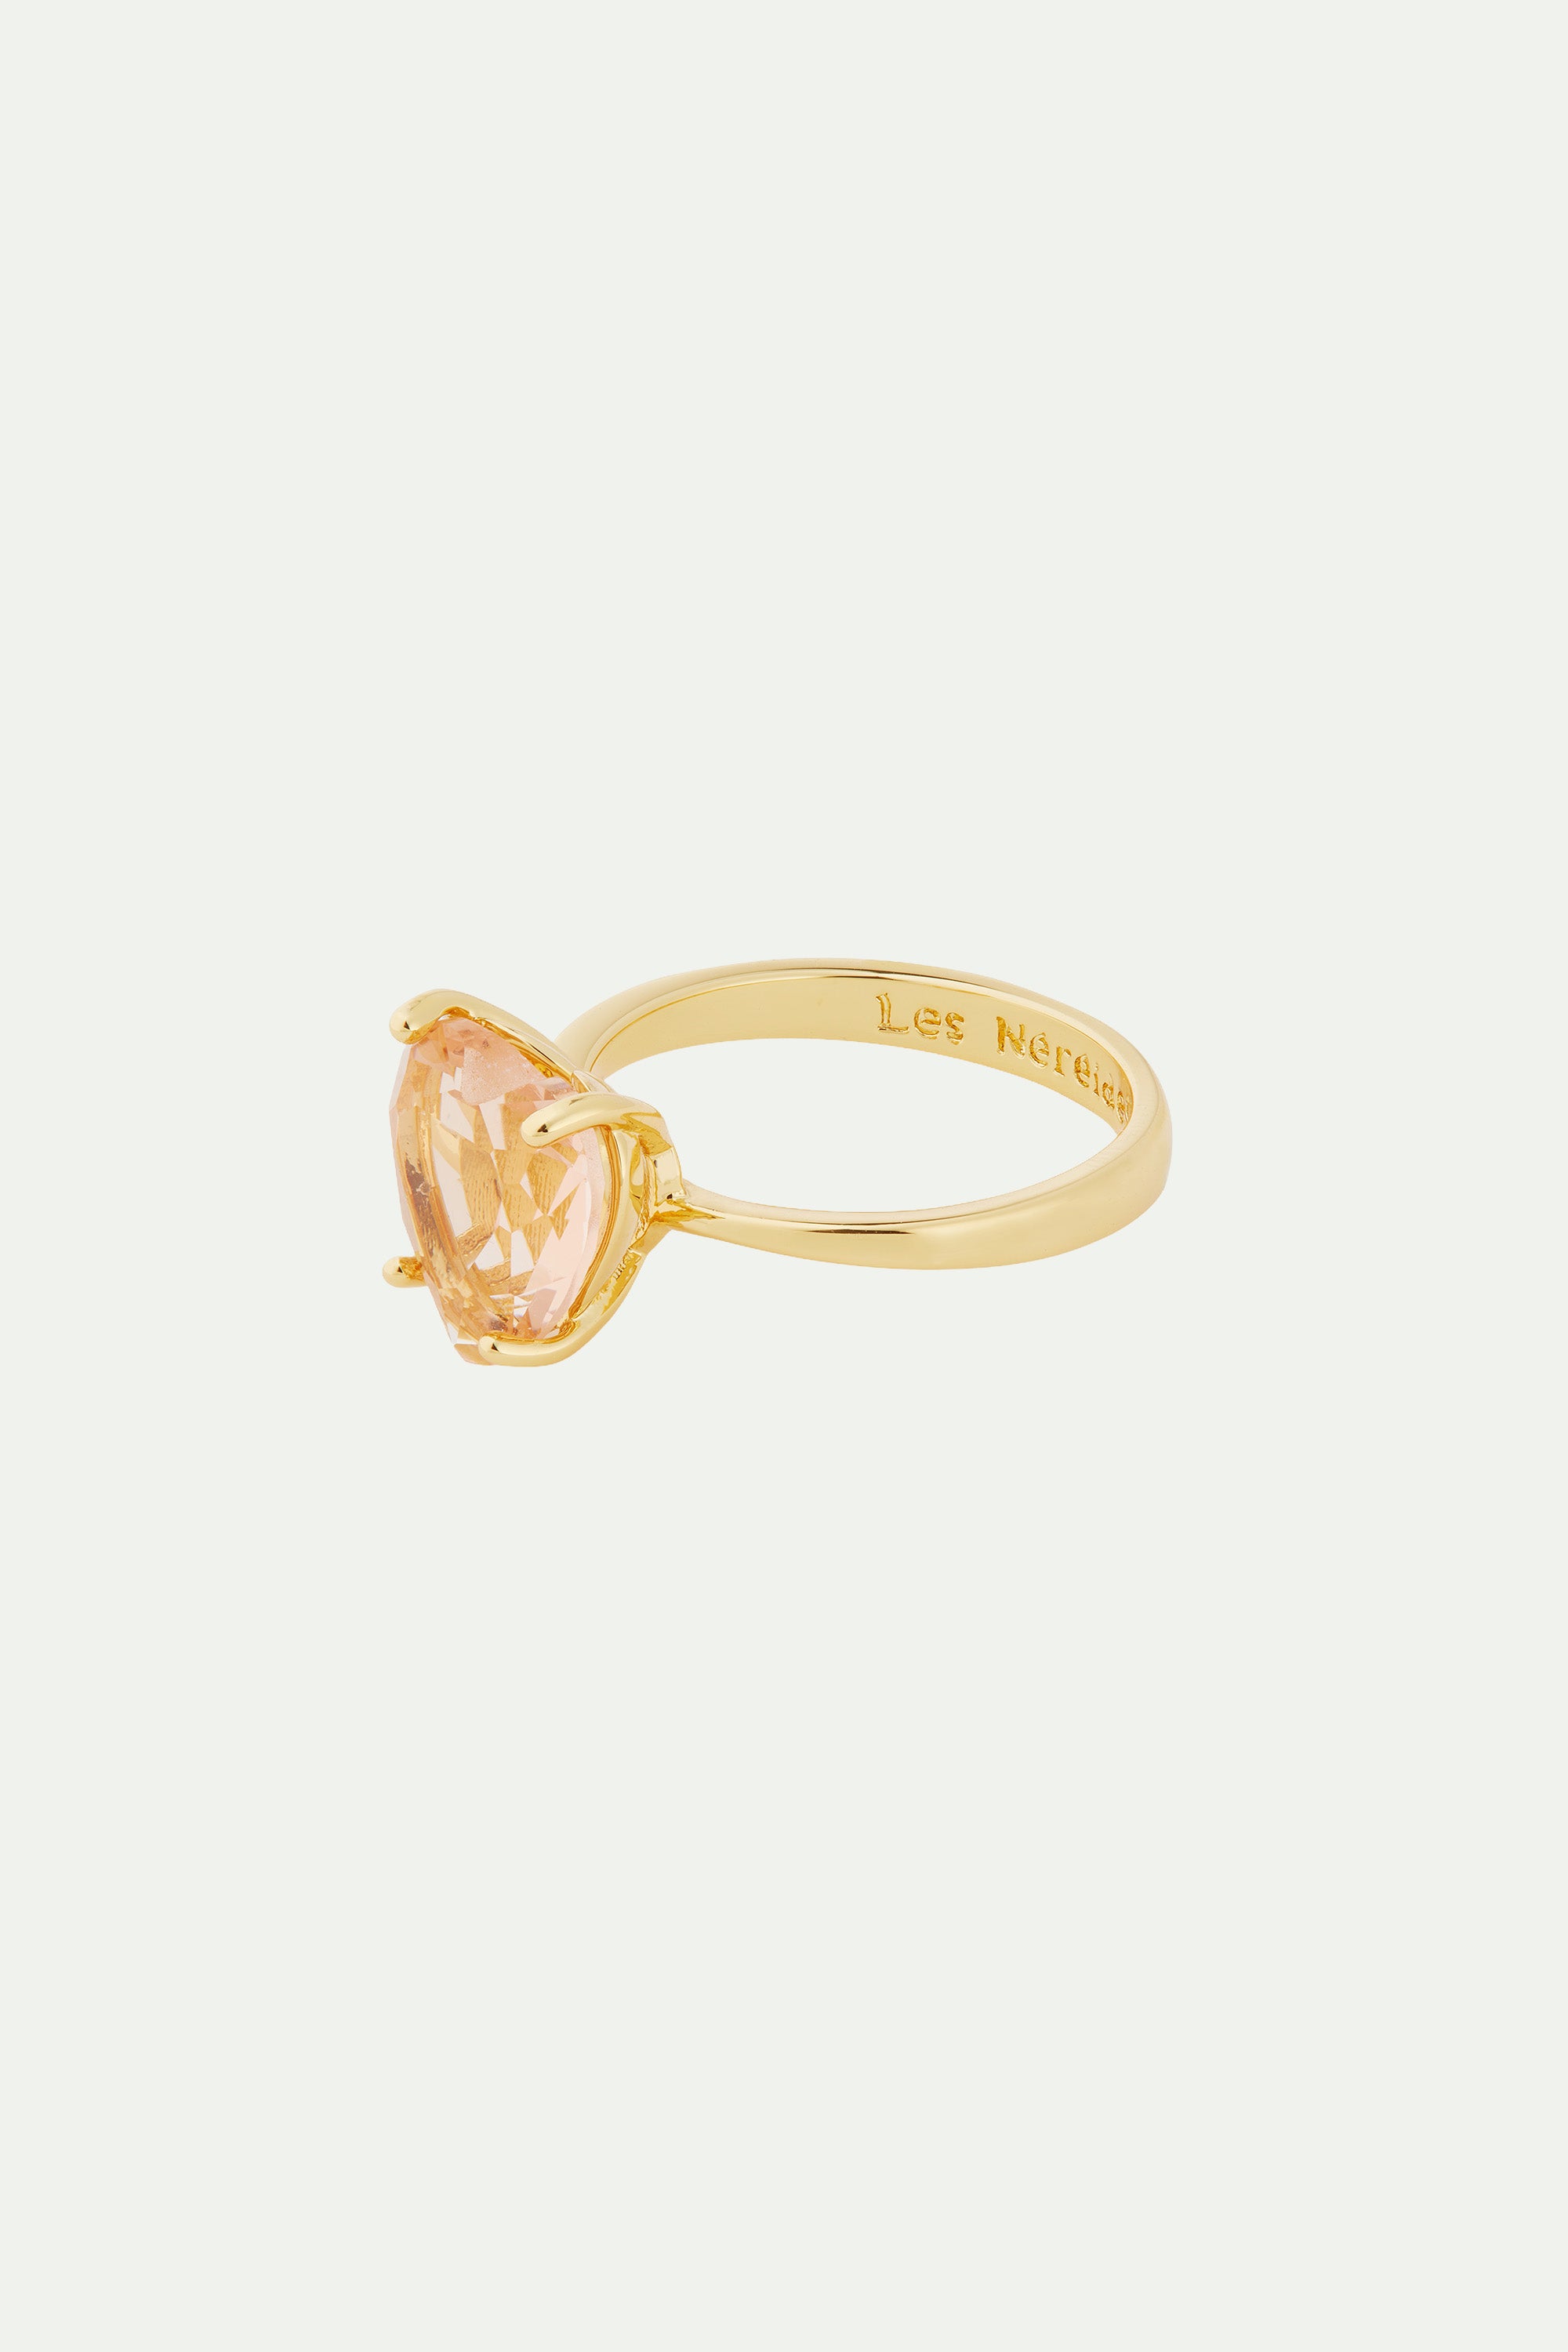 Apricot pink diamantine heart solitaire ring